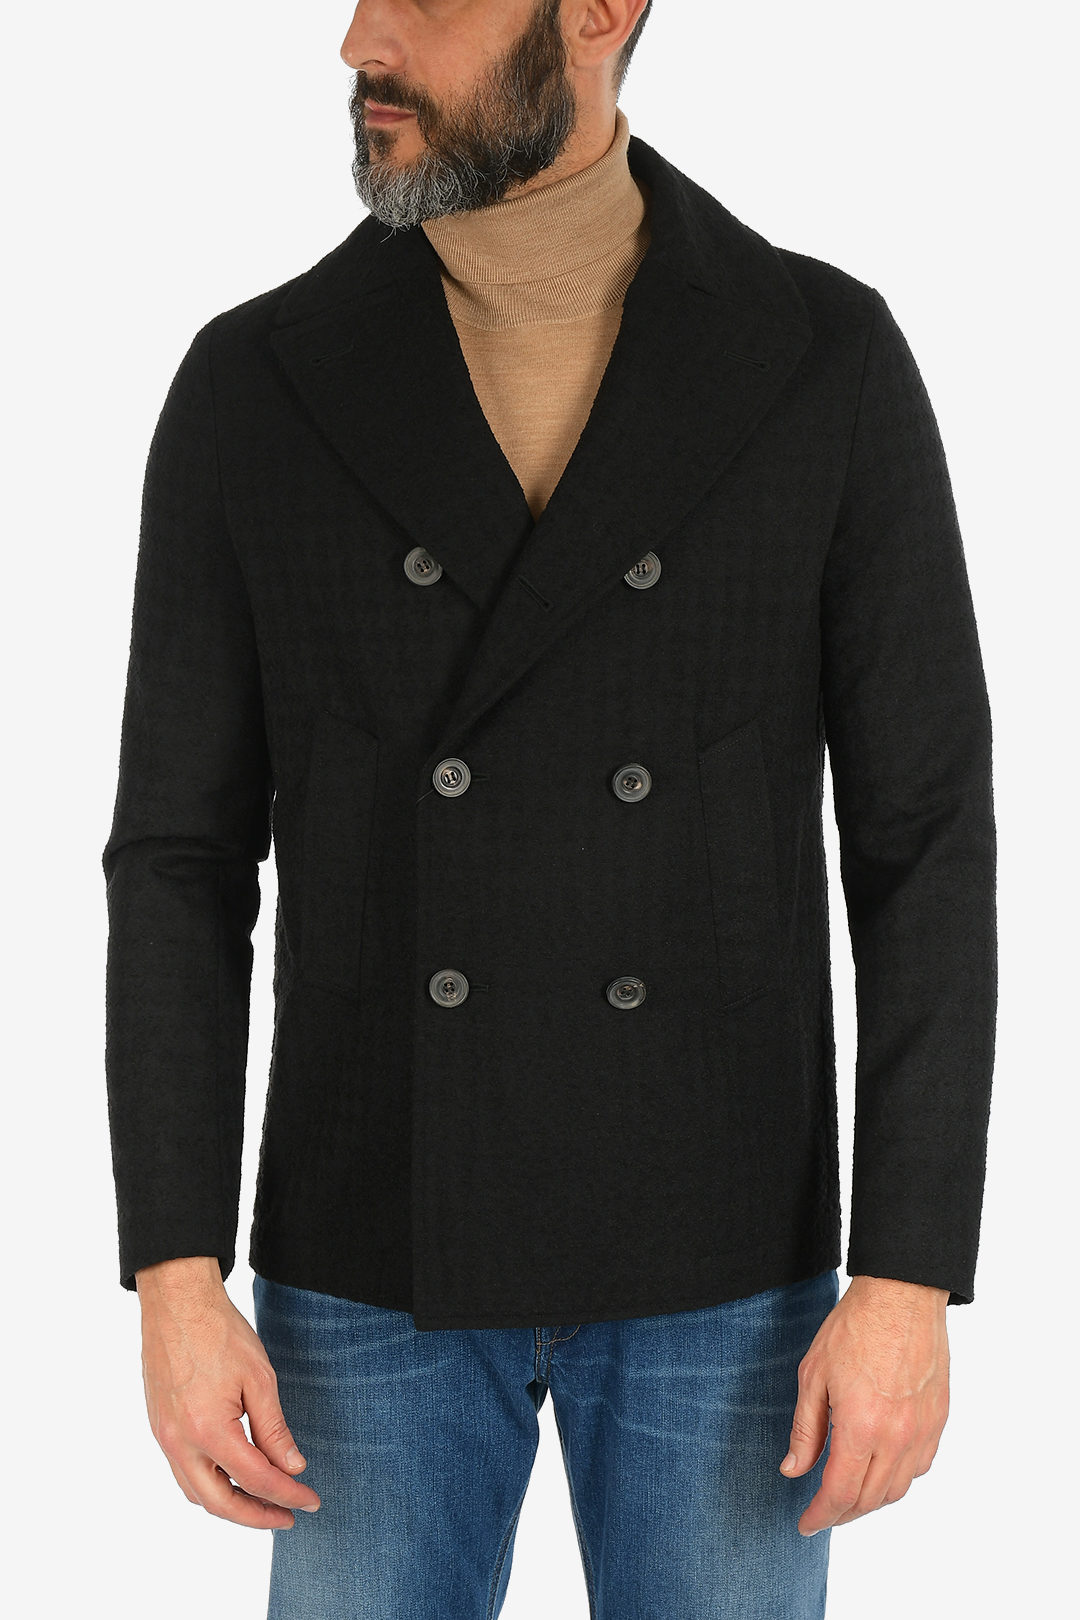 Corneliani double breasted Chesterfield coat men - Glamood Outlet